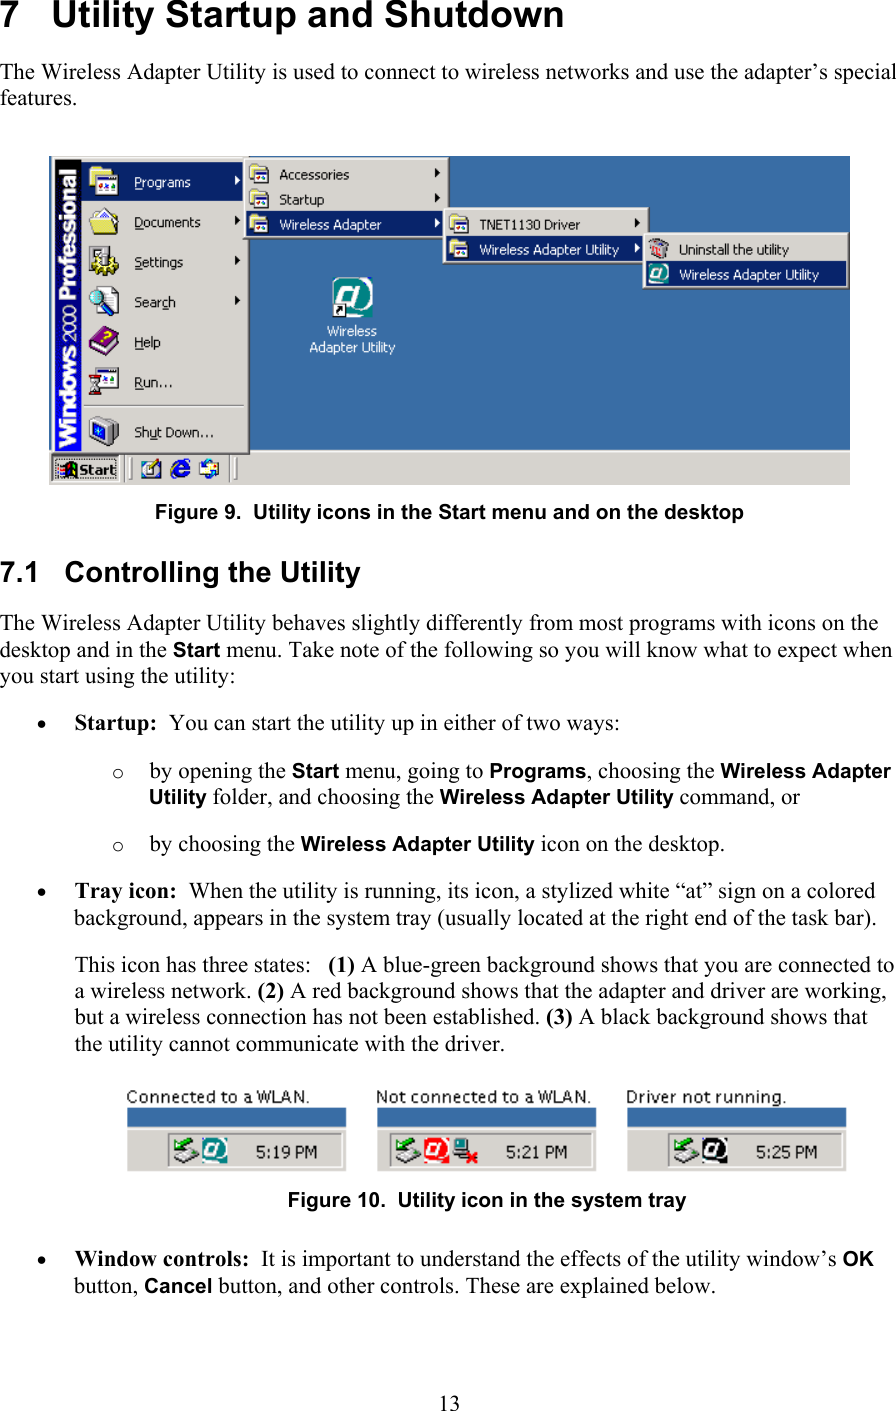  7   Utility Startup and Shutdown The Wireless Adapter Utility is used to connect to wireless networks and use the adapter’s special features.  Figure 9.  Utility icons in the Start menu and on the desktop 7.1   Controlling the Utility The Wireless Adapter Utility behaves slightly differently from most programs with icons on the desktop and in the Start menu. Take note of the following so you will know what to expect when you start using the utility: •  Startup:  You can start the utility up in either of two ways: o  by opening the Start menu, going to Programs, choosing the Wireless Adapter Utility folder, and choosing the Wireless Adapter Utility command, or o  by choosing the Wireless Adapter Utility icon on the desktop. •  Tray icon:  When the utility is running, its icon, a stylized white “at” sign on a colored background, appears in the system tray (usually located at the right end of the task bar). This icon has three states:   (1) A blue-green background shows that you are connected to a wireless network. (2) A red background shows that the adapter and driver are working, but a wireless connection has not been established. (3) A black background shows that the utility cannot communicate with the driver.  Figure 10.  Utility icon in the system tray •  Window controls:  It is important to understand the effects of the utility window’s OK button, Cancel button, and other controls. These are explained below.  13